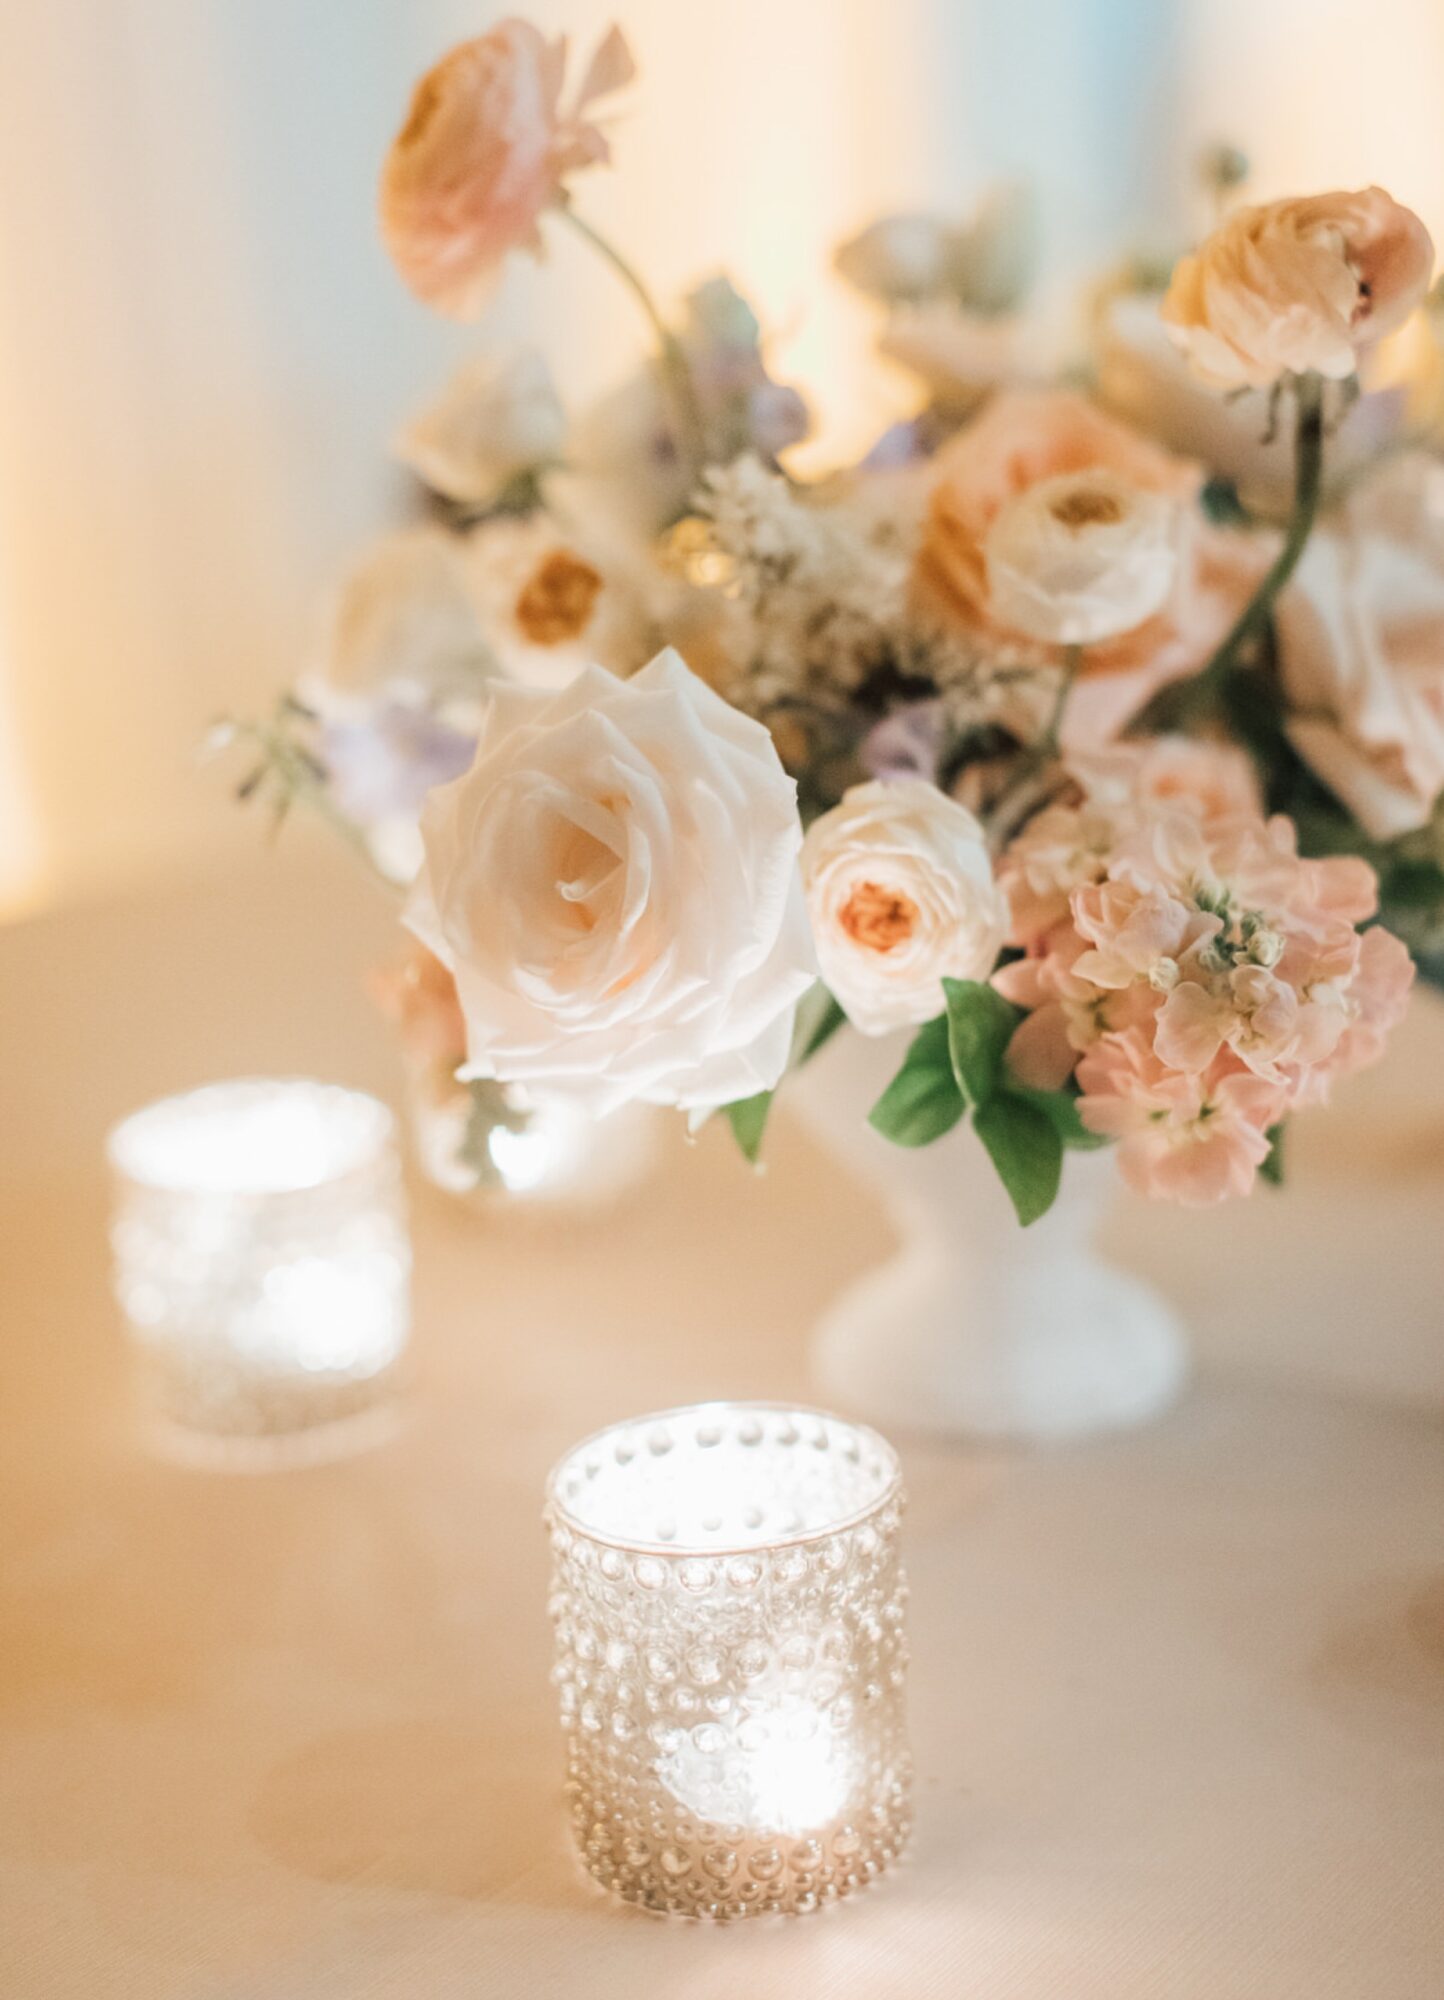 evening lit reception florals by Elegant Details at the White Barn Edna Valley photographed by san luis obispo wedding photographers jessica sofranko